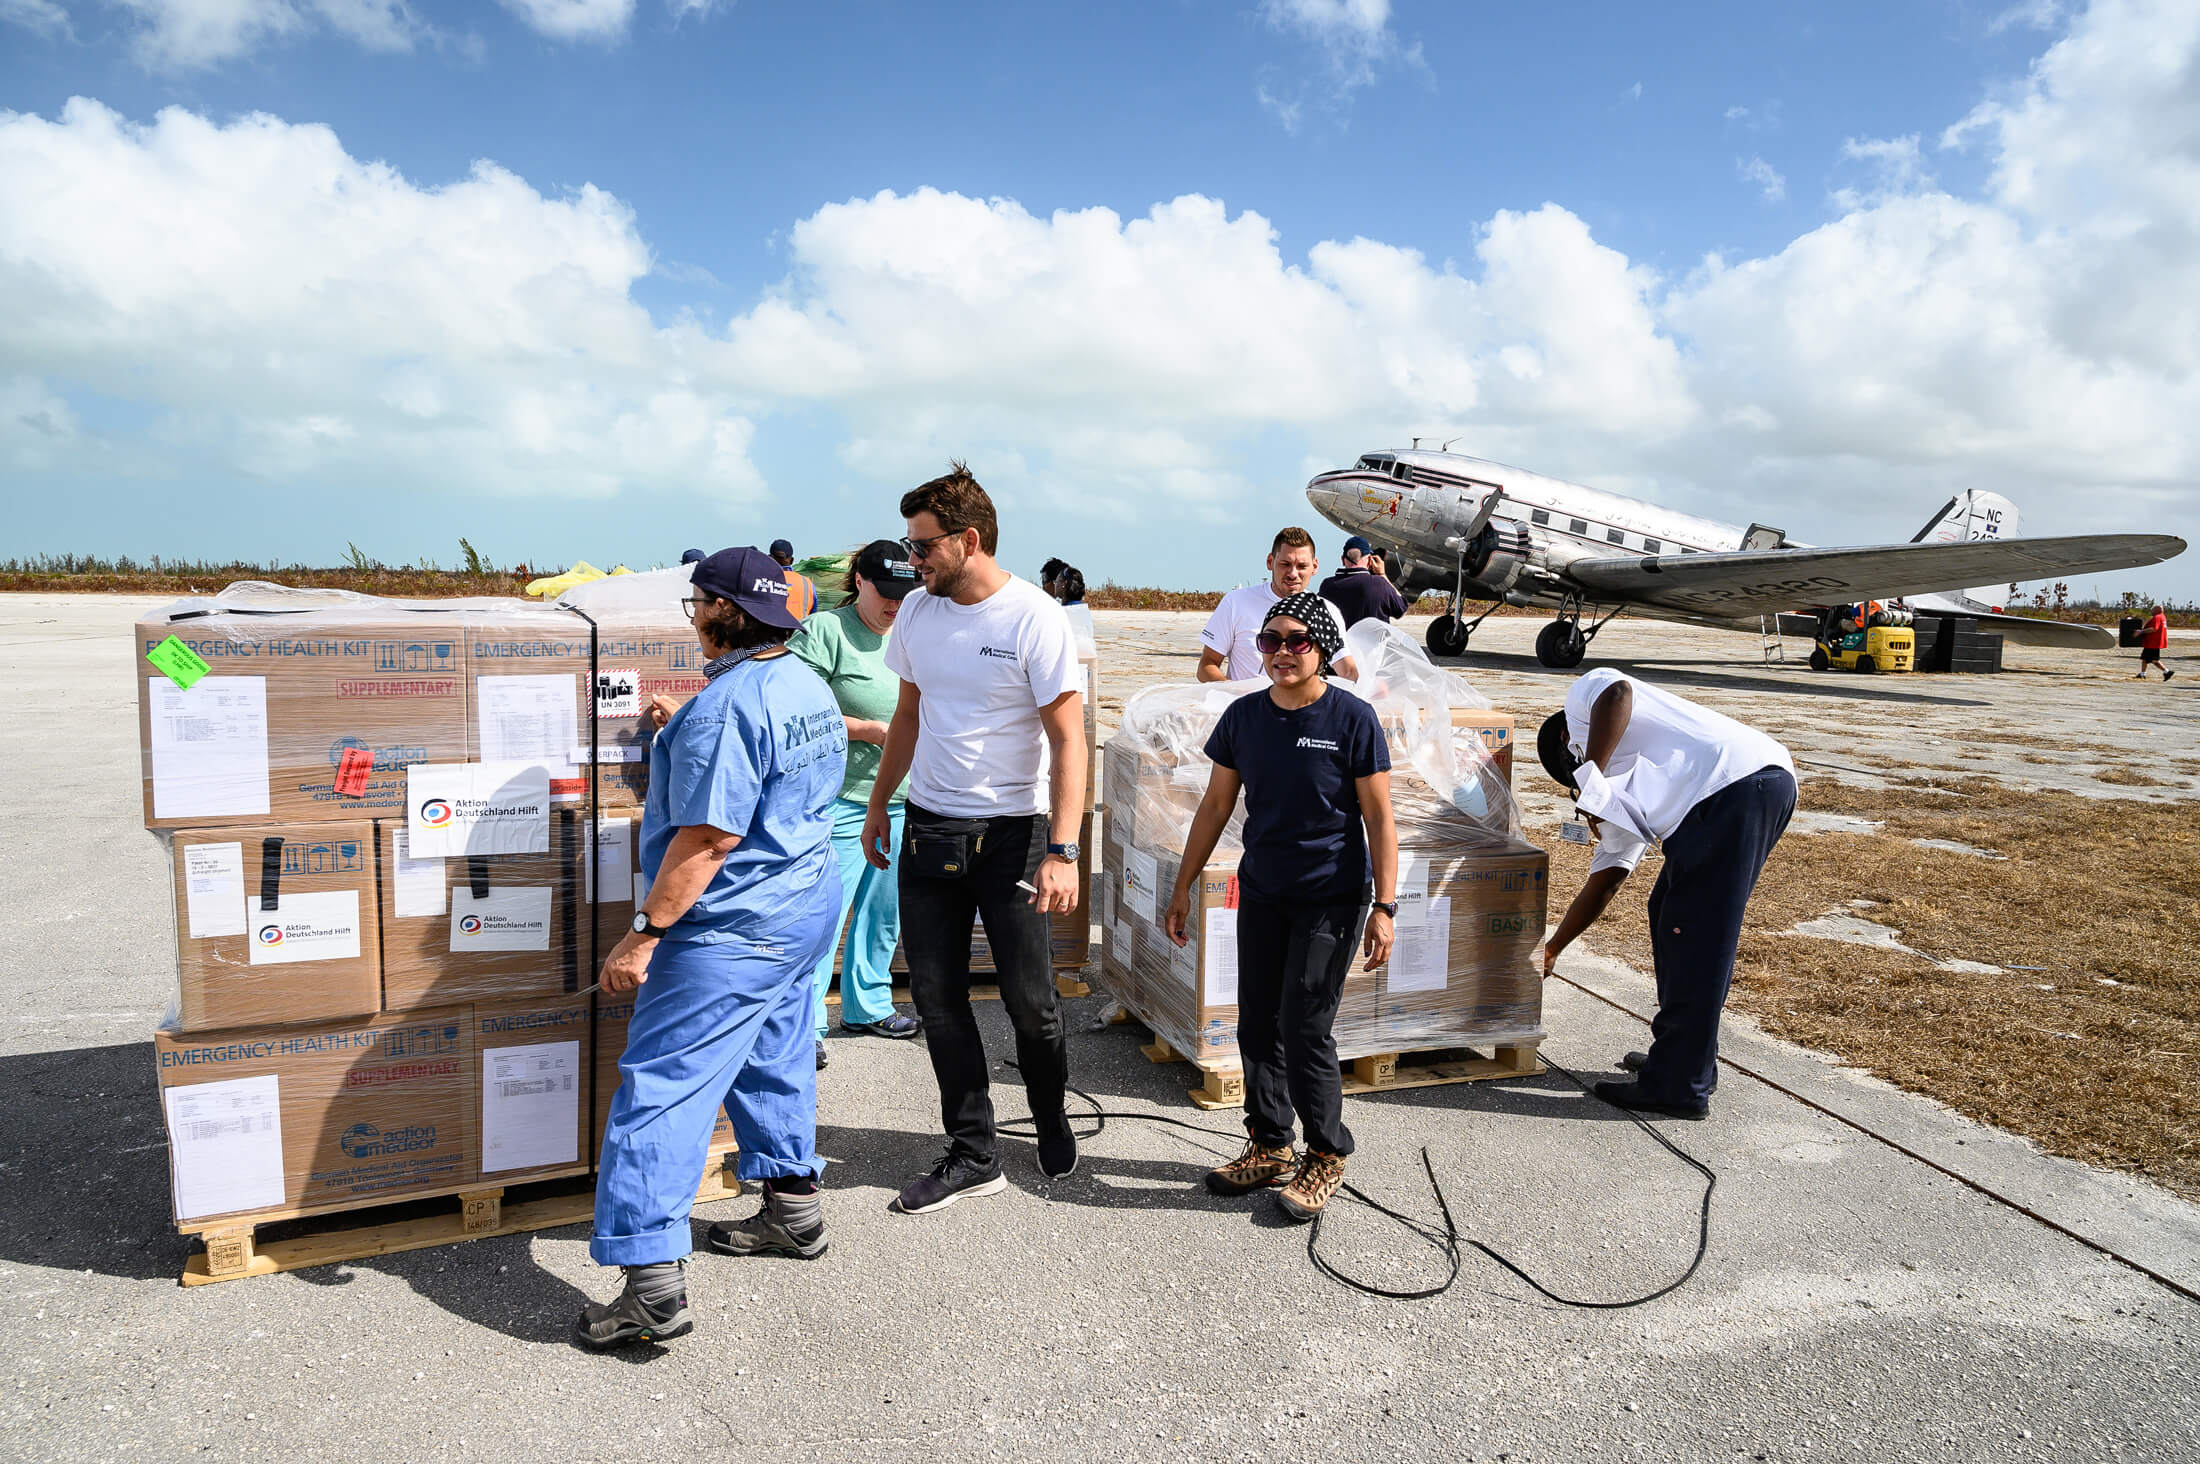 International Medical Corps Emergency Response Team members unload a shipment of emergency supplies in Freeport, Bahamas, in the wake of 2019’s Hurricane Dorian. The shipments contained essential medicines, consumables and other equipment necessary to serve hurricane-stricken communities.